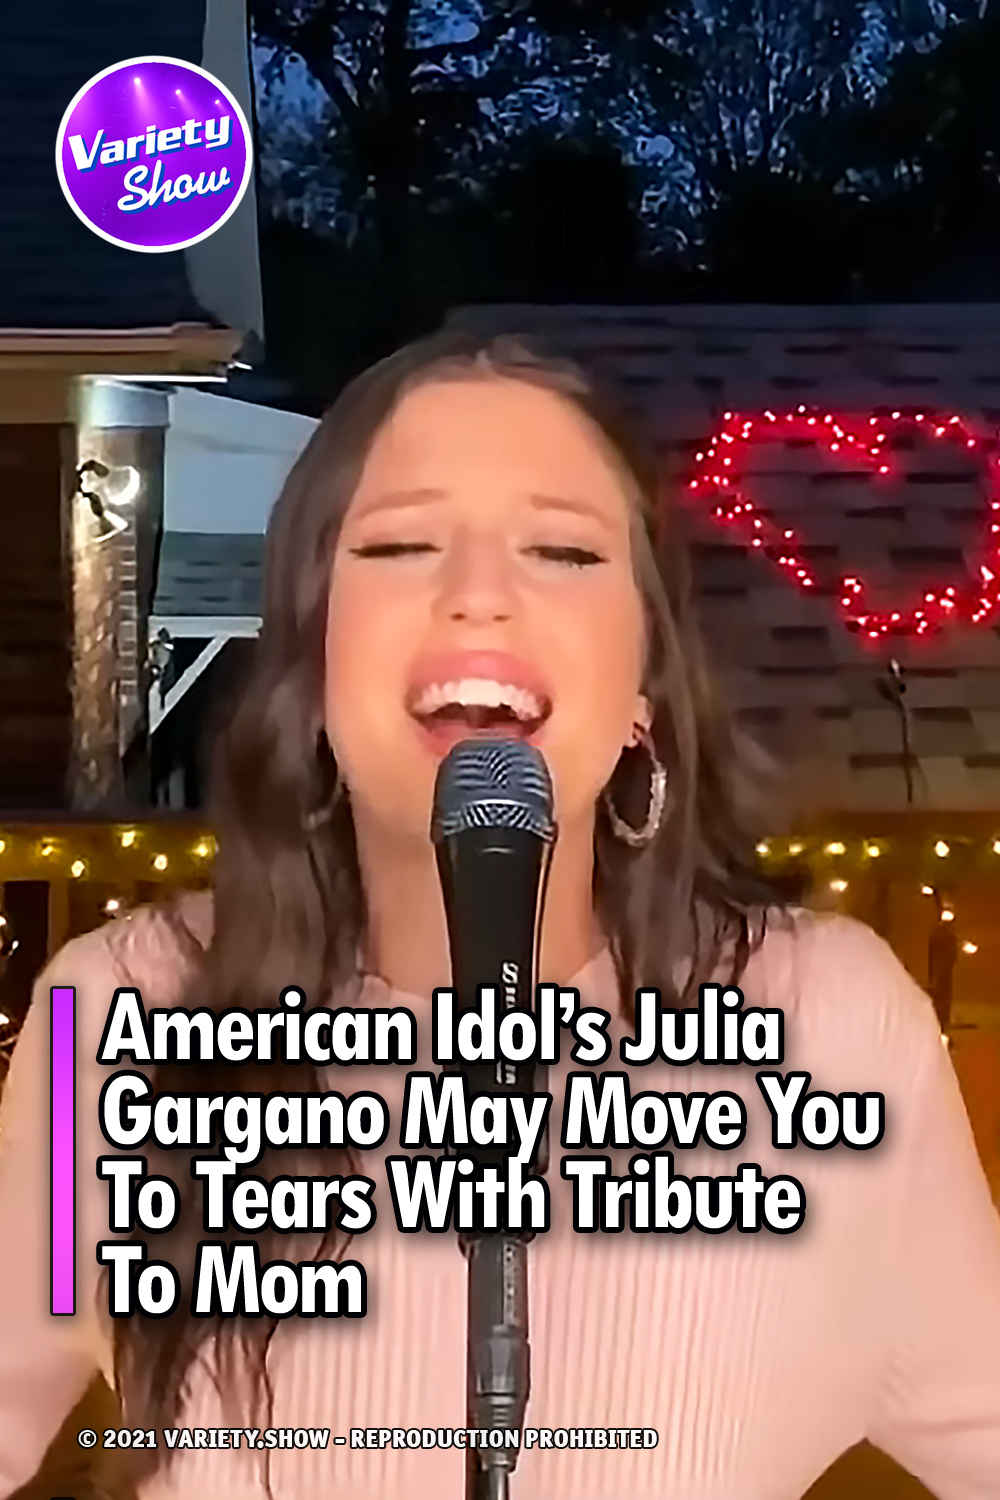 American Idol’s Julia Gargano May Move You To Tears With Tribute To Mom